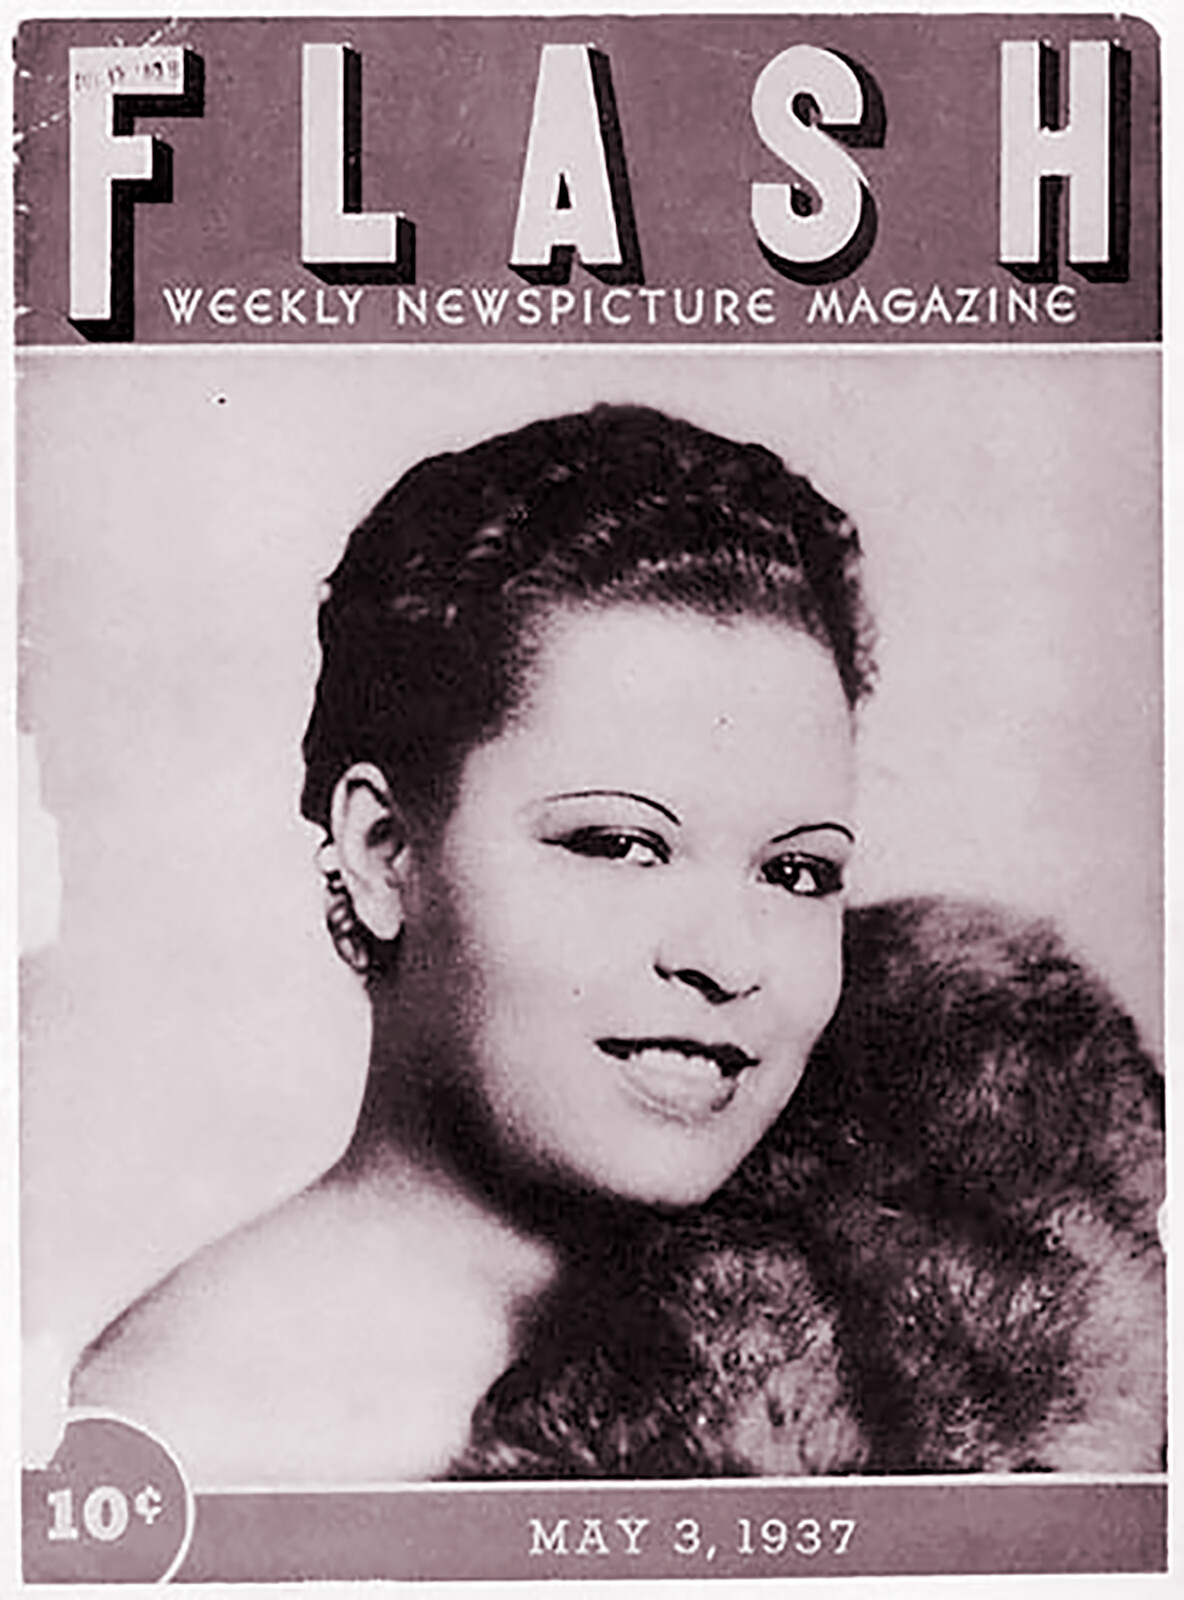 The Real Billie Holiday, Part One – 1930s